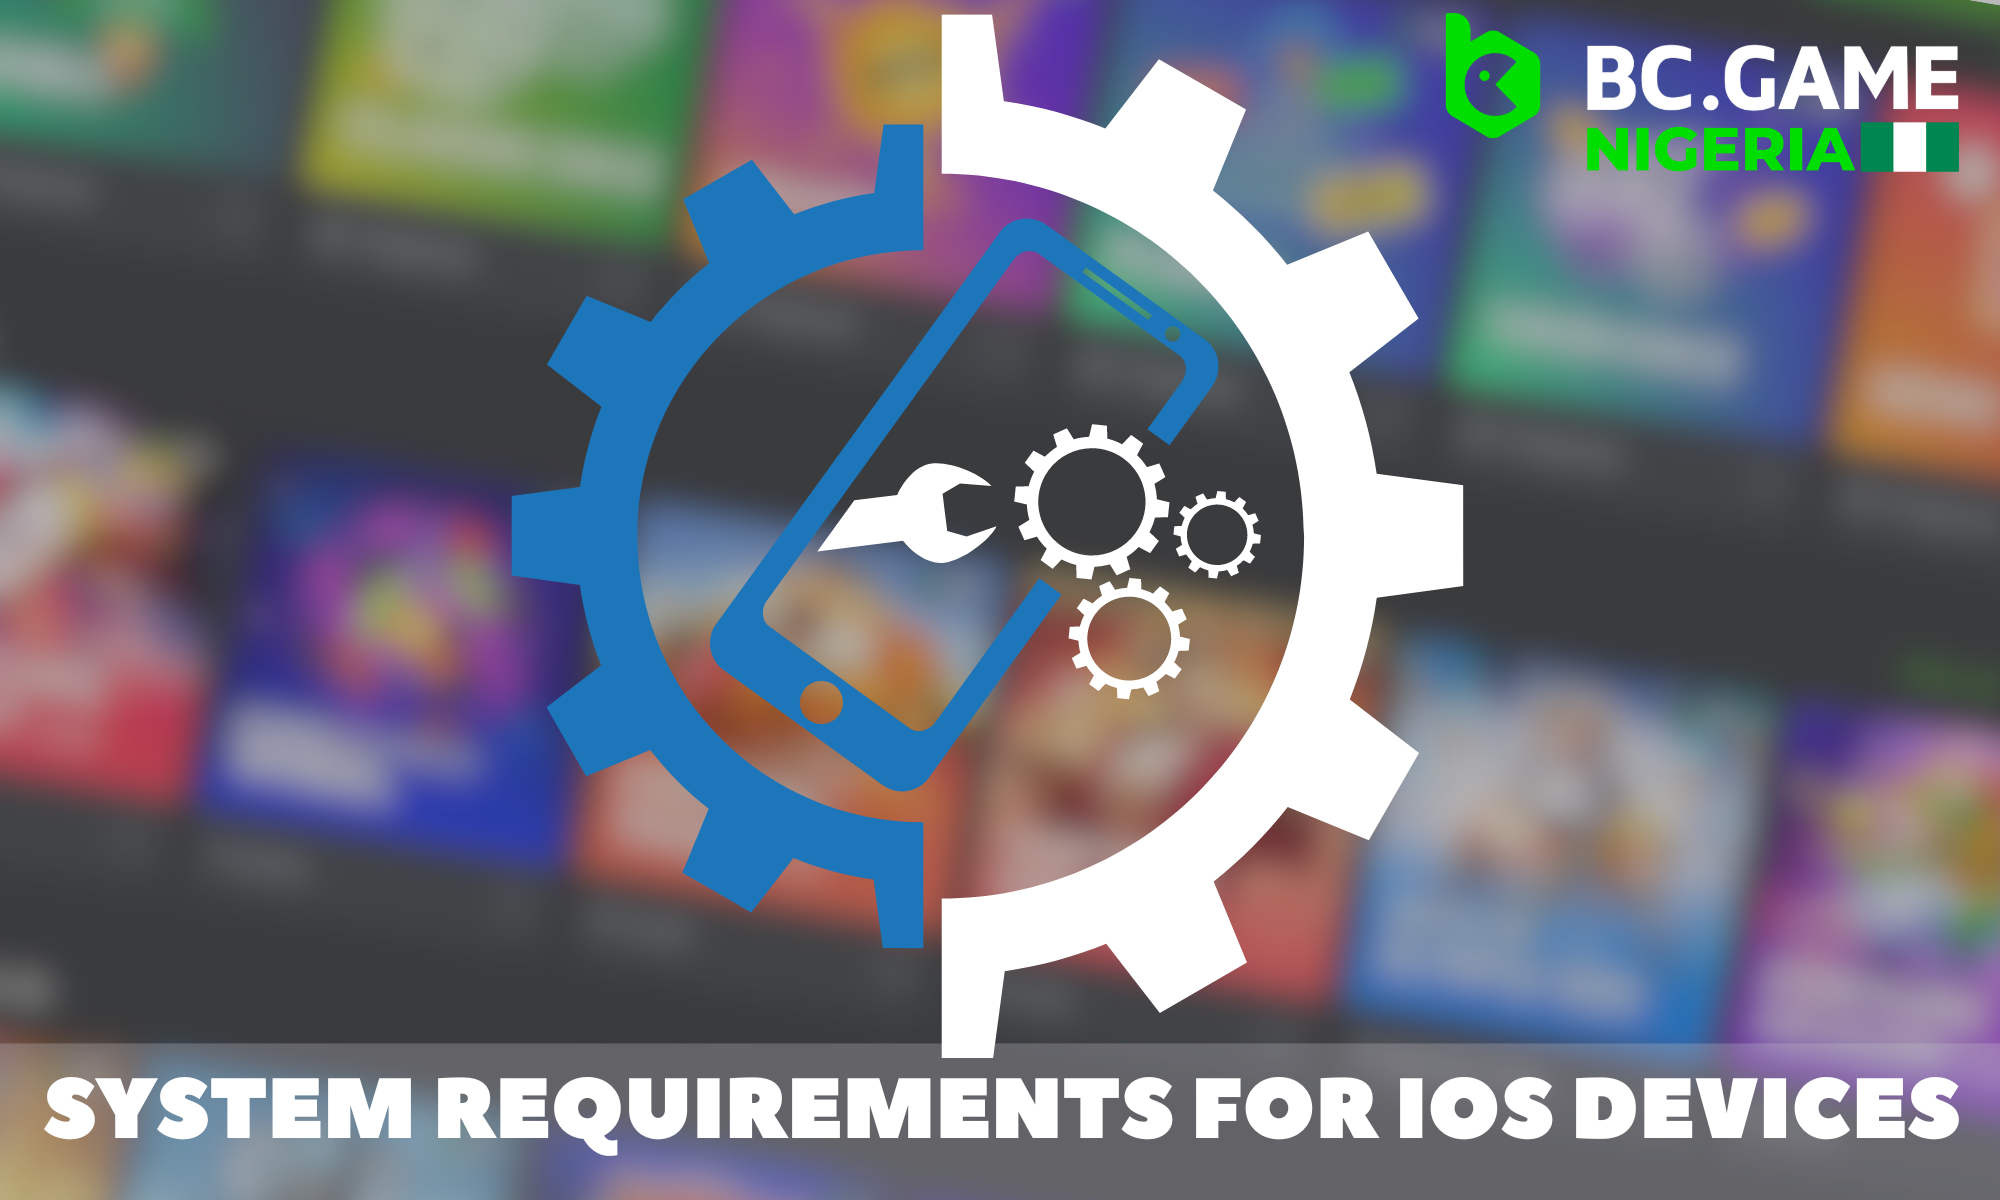 For IOS devices, there are also certain system requirements in BC Game